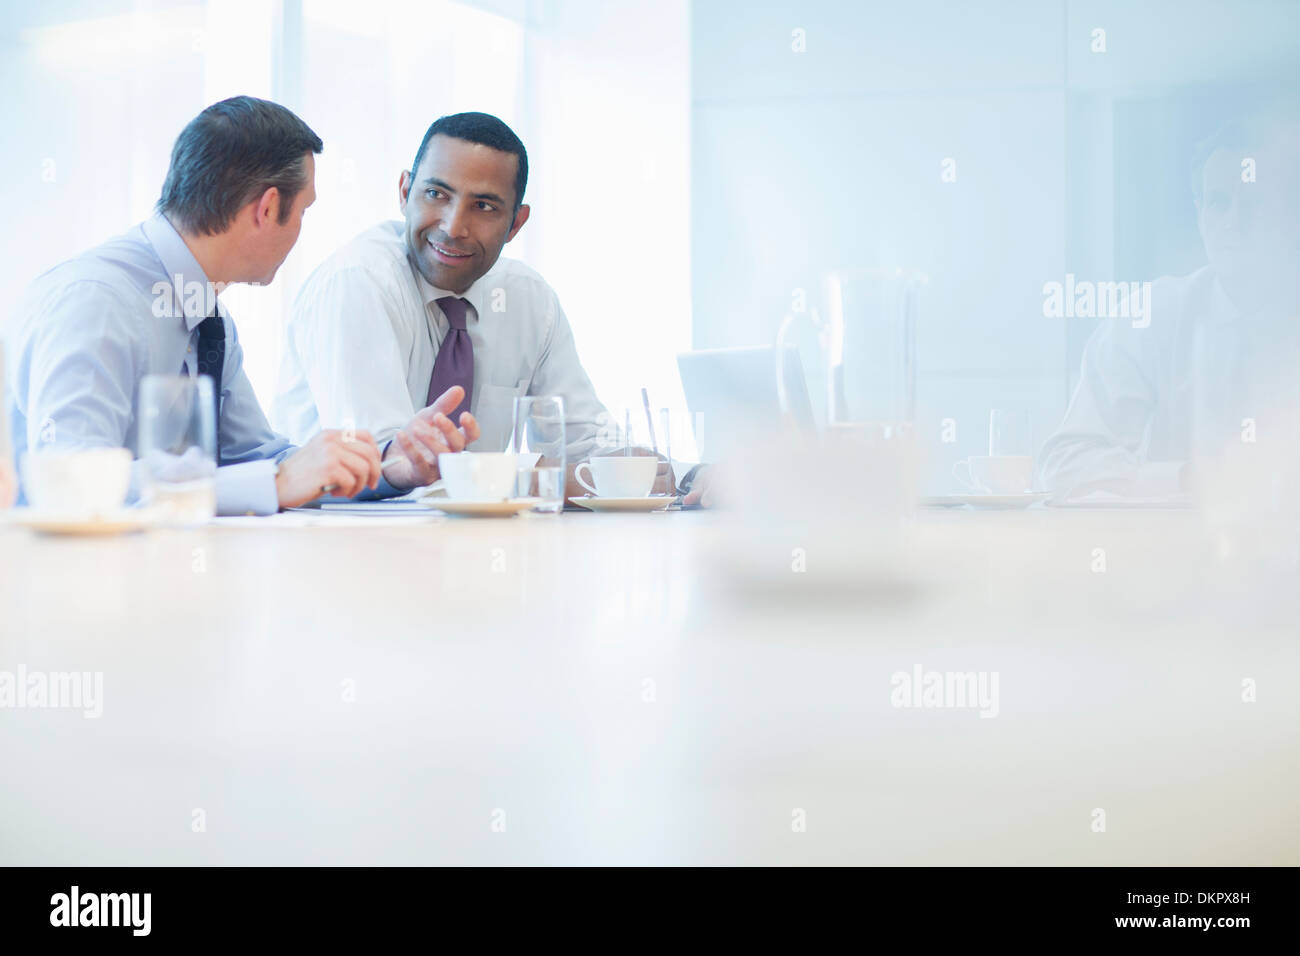 Businessmen talking in conference room Stock Photo